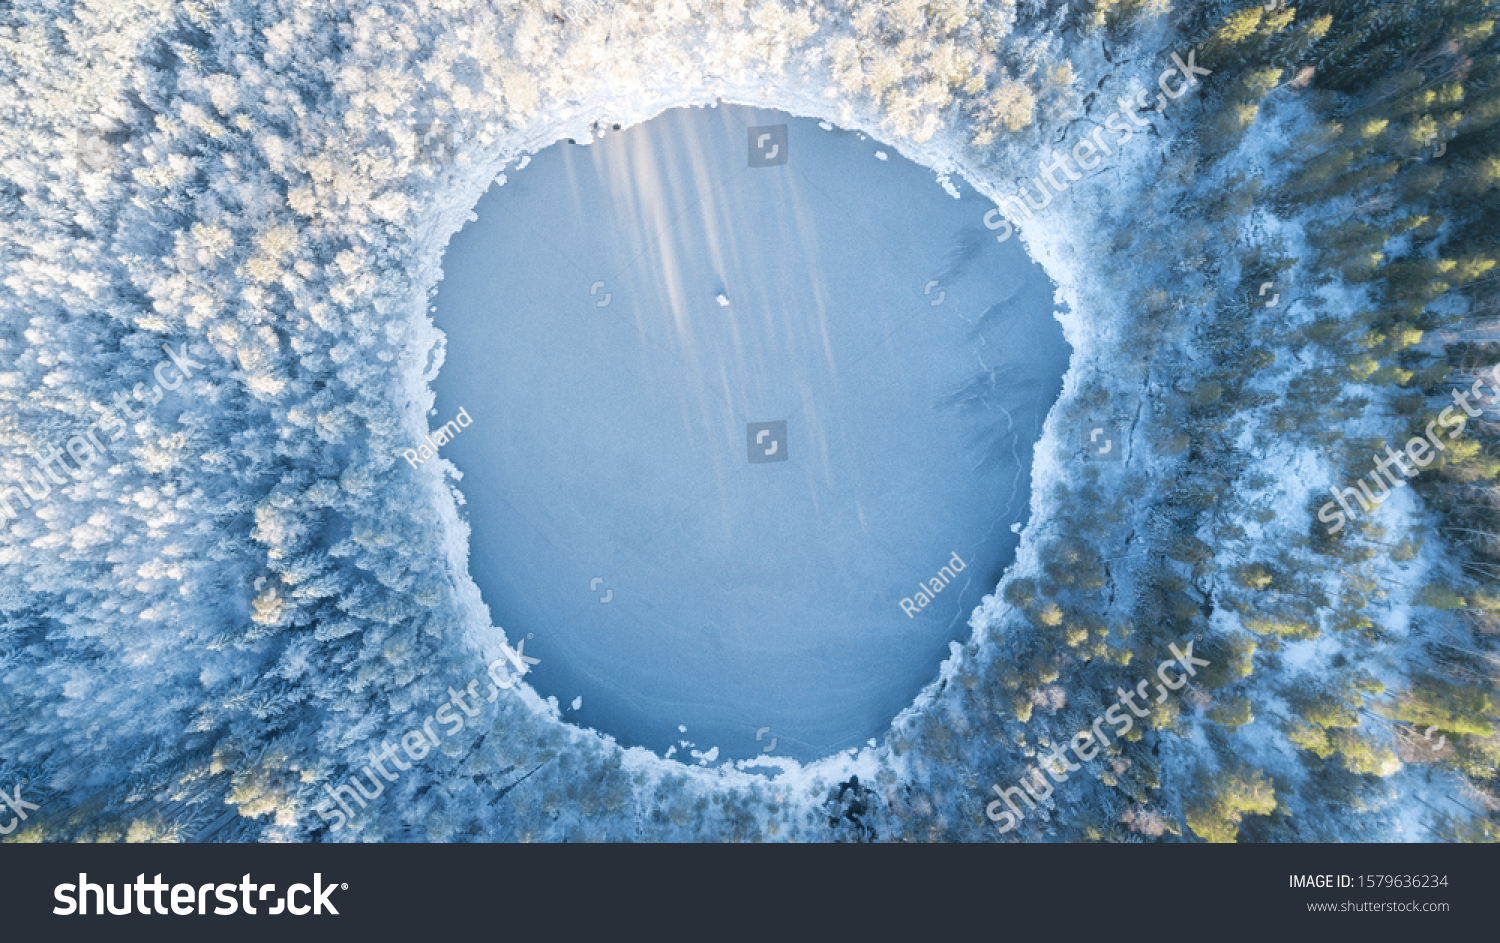 Аerial view of snow covered forest around beautiful lake. Rime ice and hoar frost covering trees. Scenic winter landscape near Helsinki, Finland. #1579636234